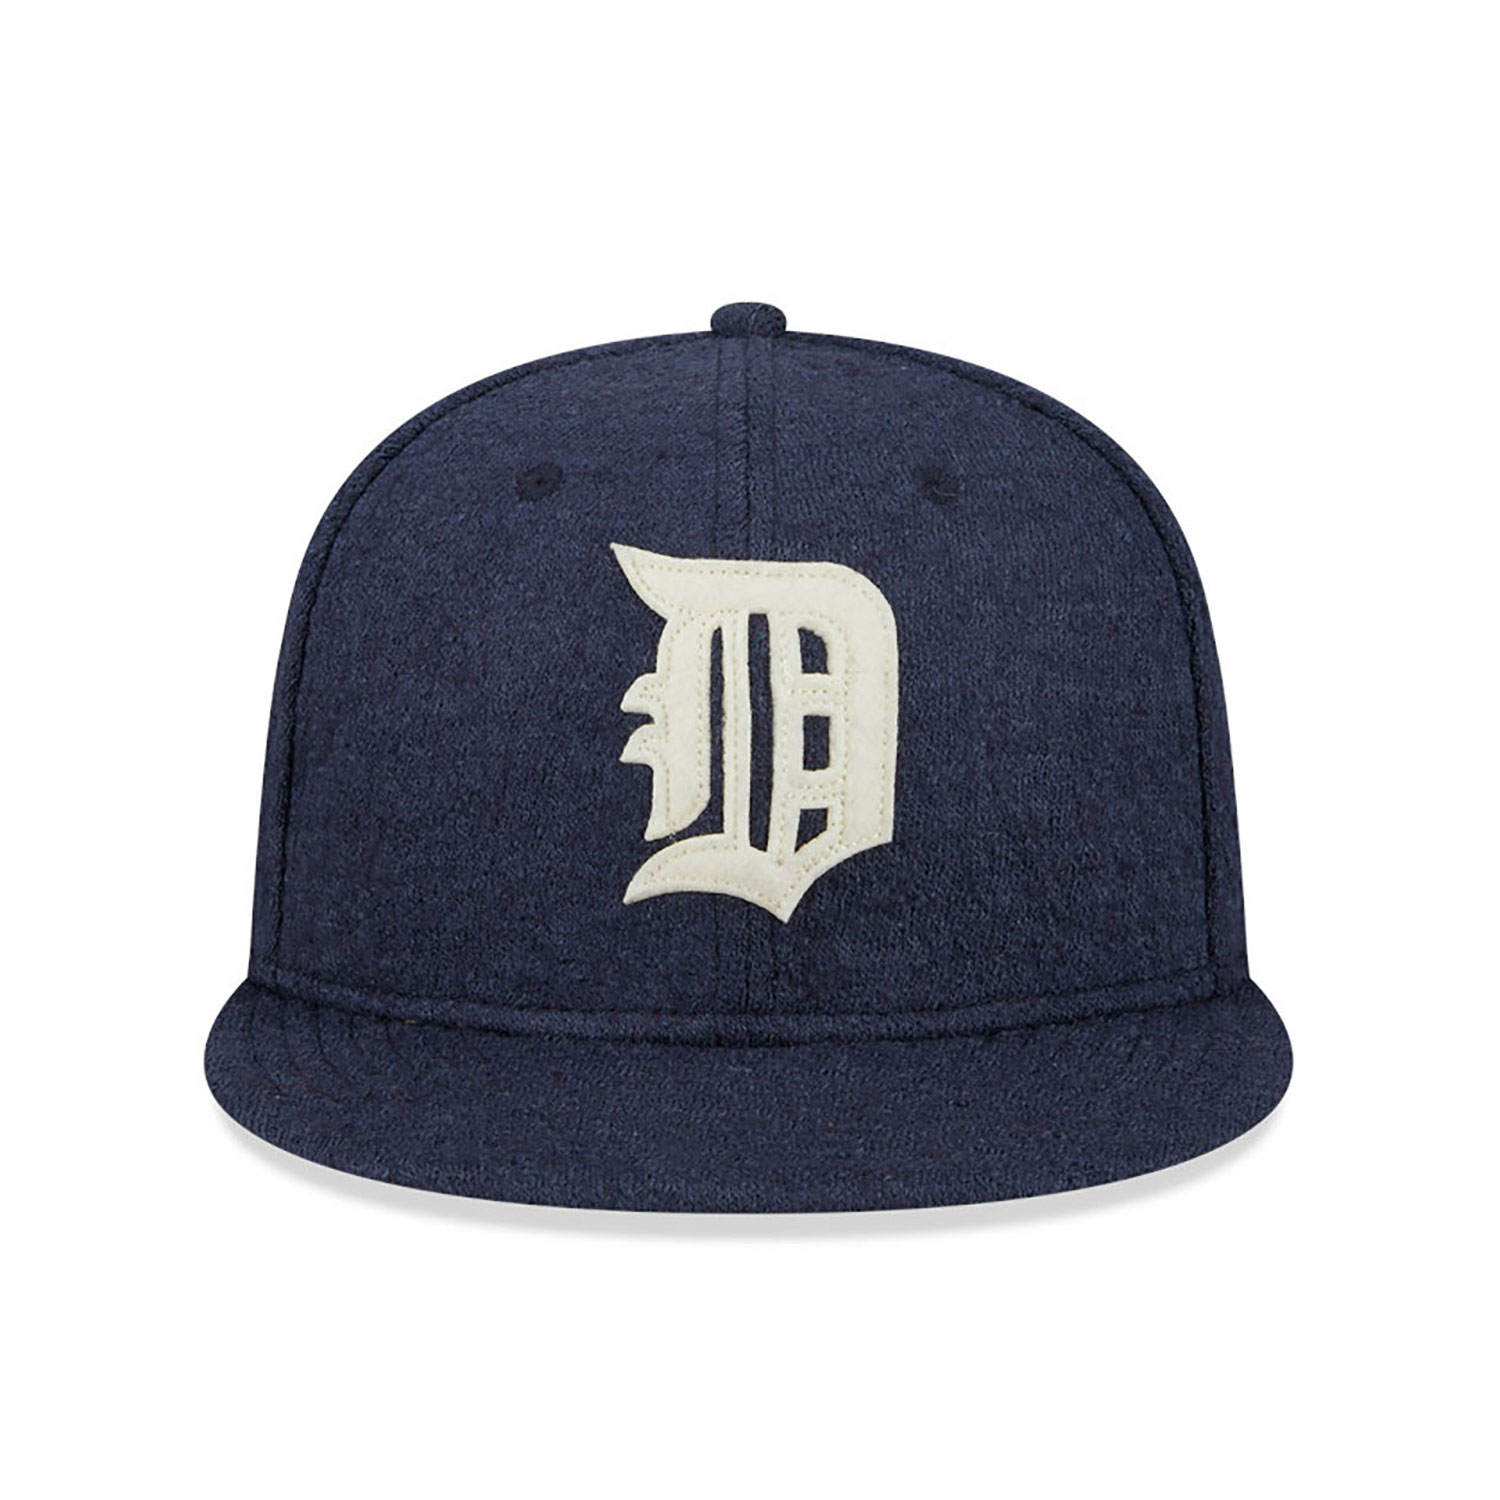 Detroit Tigers MLB Cooperstown Navy 59FIFTY Fitted Cap